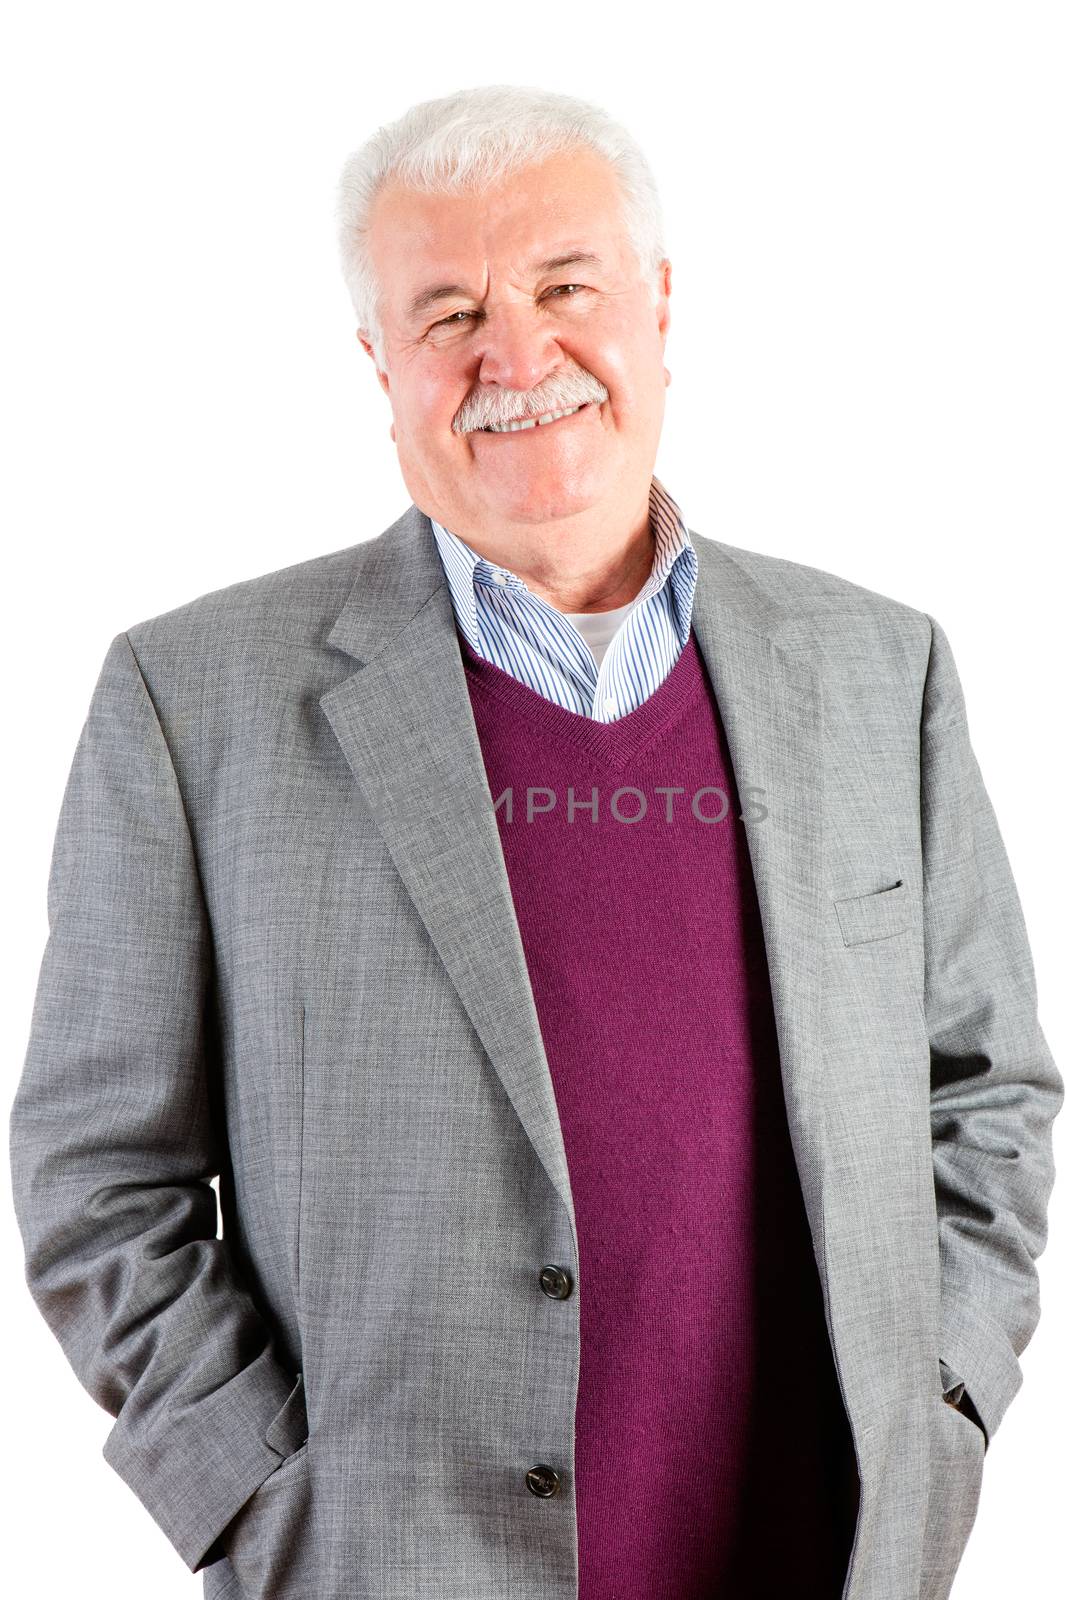 Jovial relaxed attractive senior man with white hair and a moustache standing with his hands in his pockets smiling at the camera, isolated on white